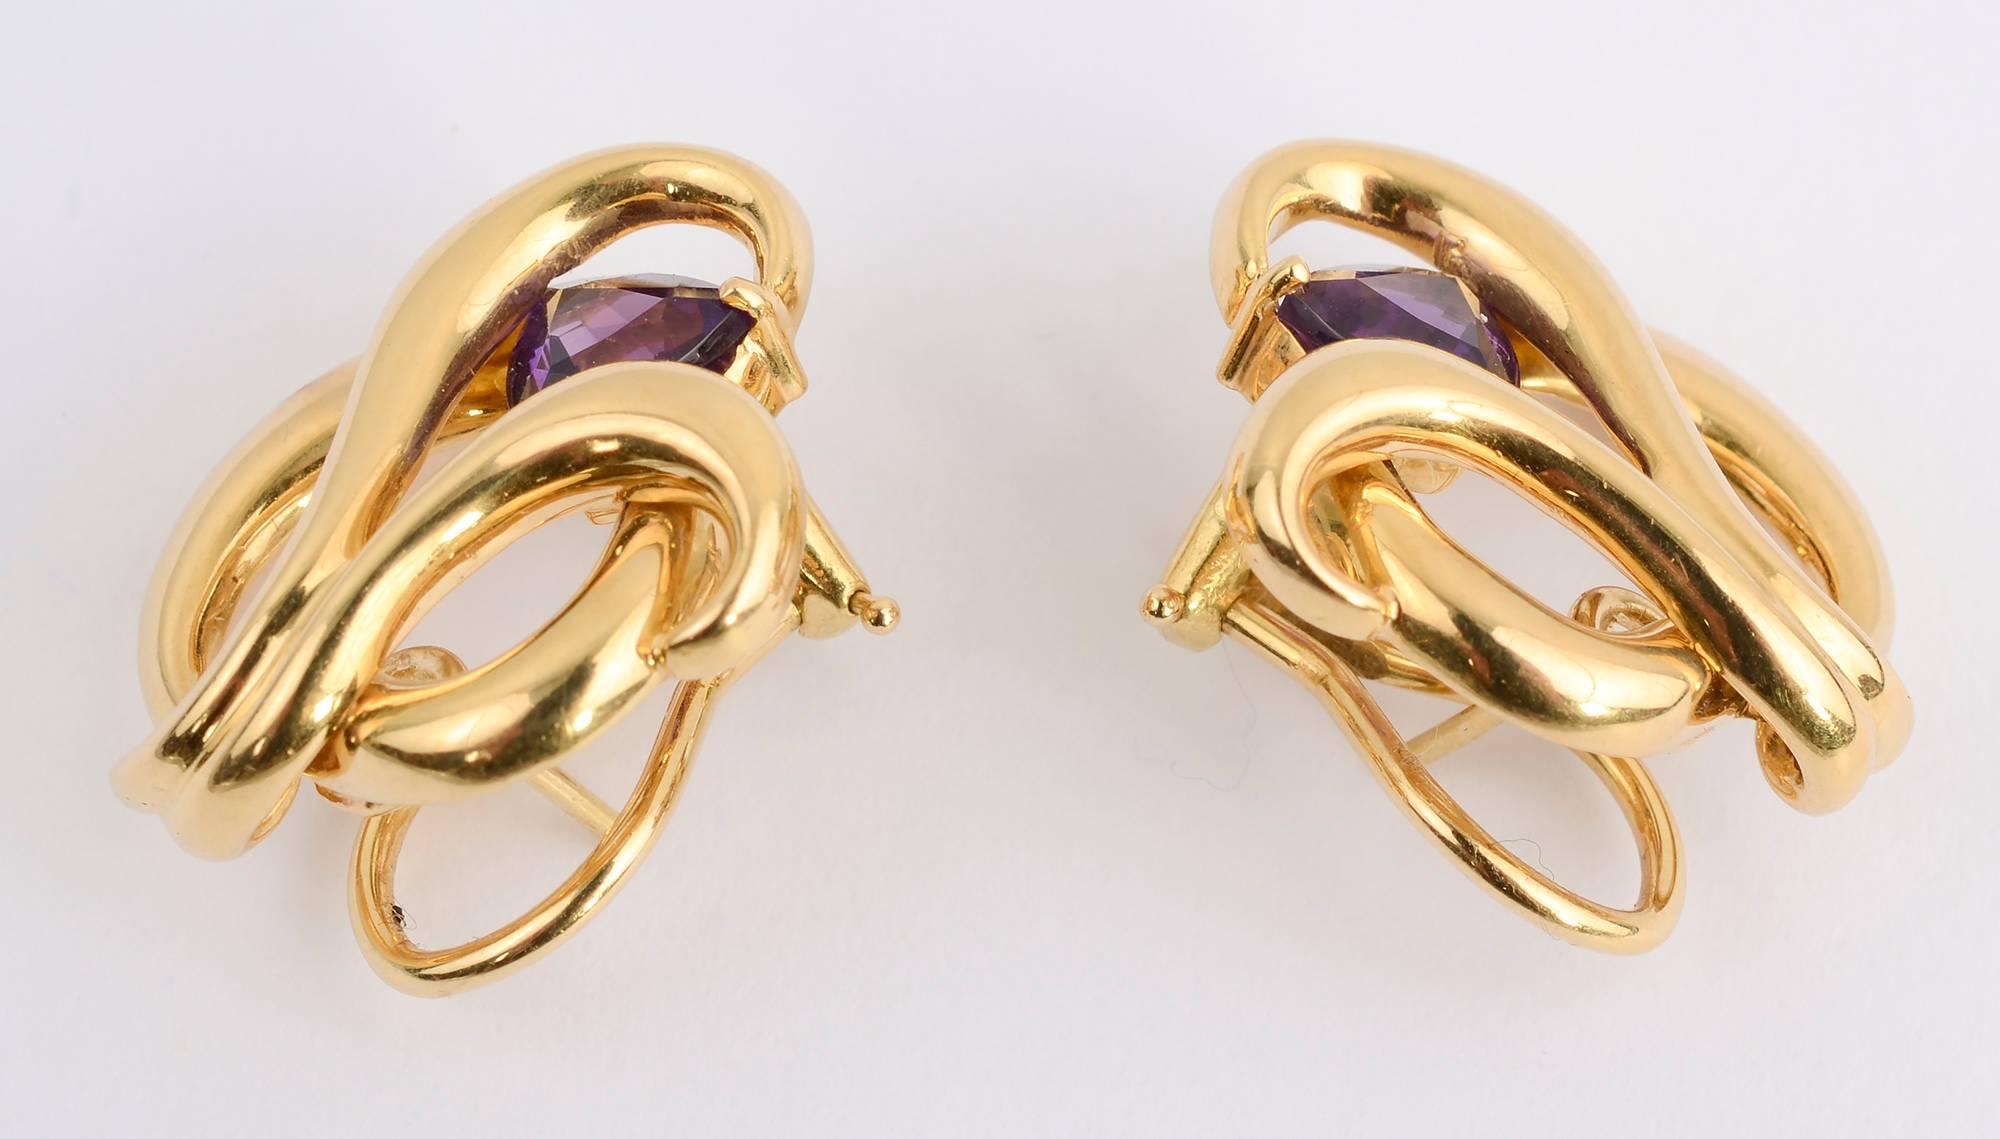 Very graceful 18 karat gold earrings in a swirl pattern highlighted with a faceted amethyst in a triangular shape. The backs are both clips and posts. 
The earrings are 1 inch long and 7/8 inches wide.